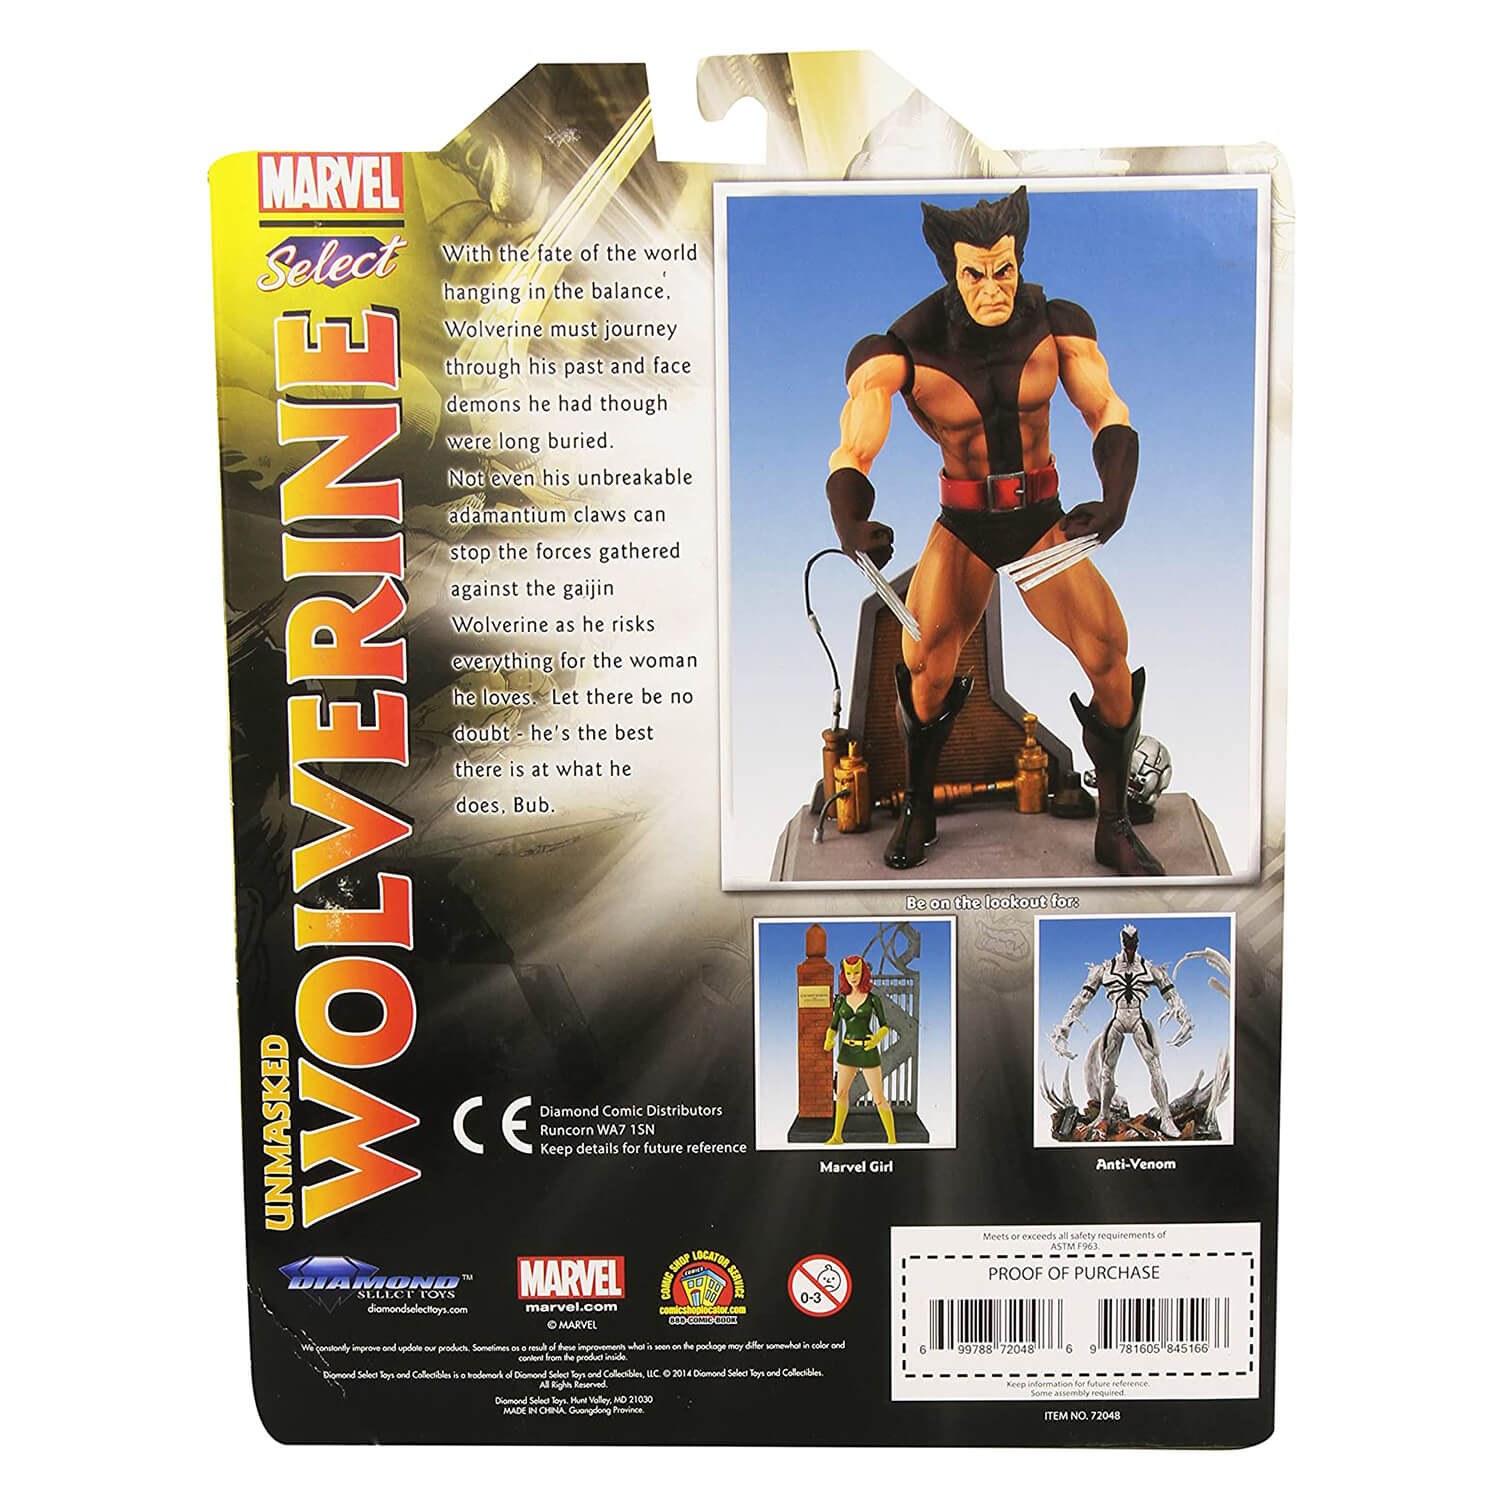 Back view of the Marvel Select Brown Wolverine Figure Unmasked packaging.